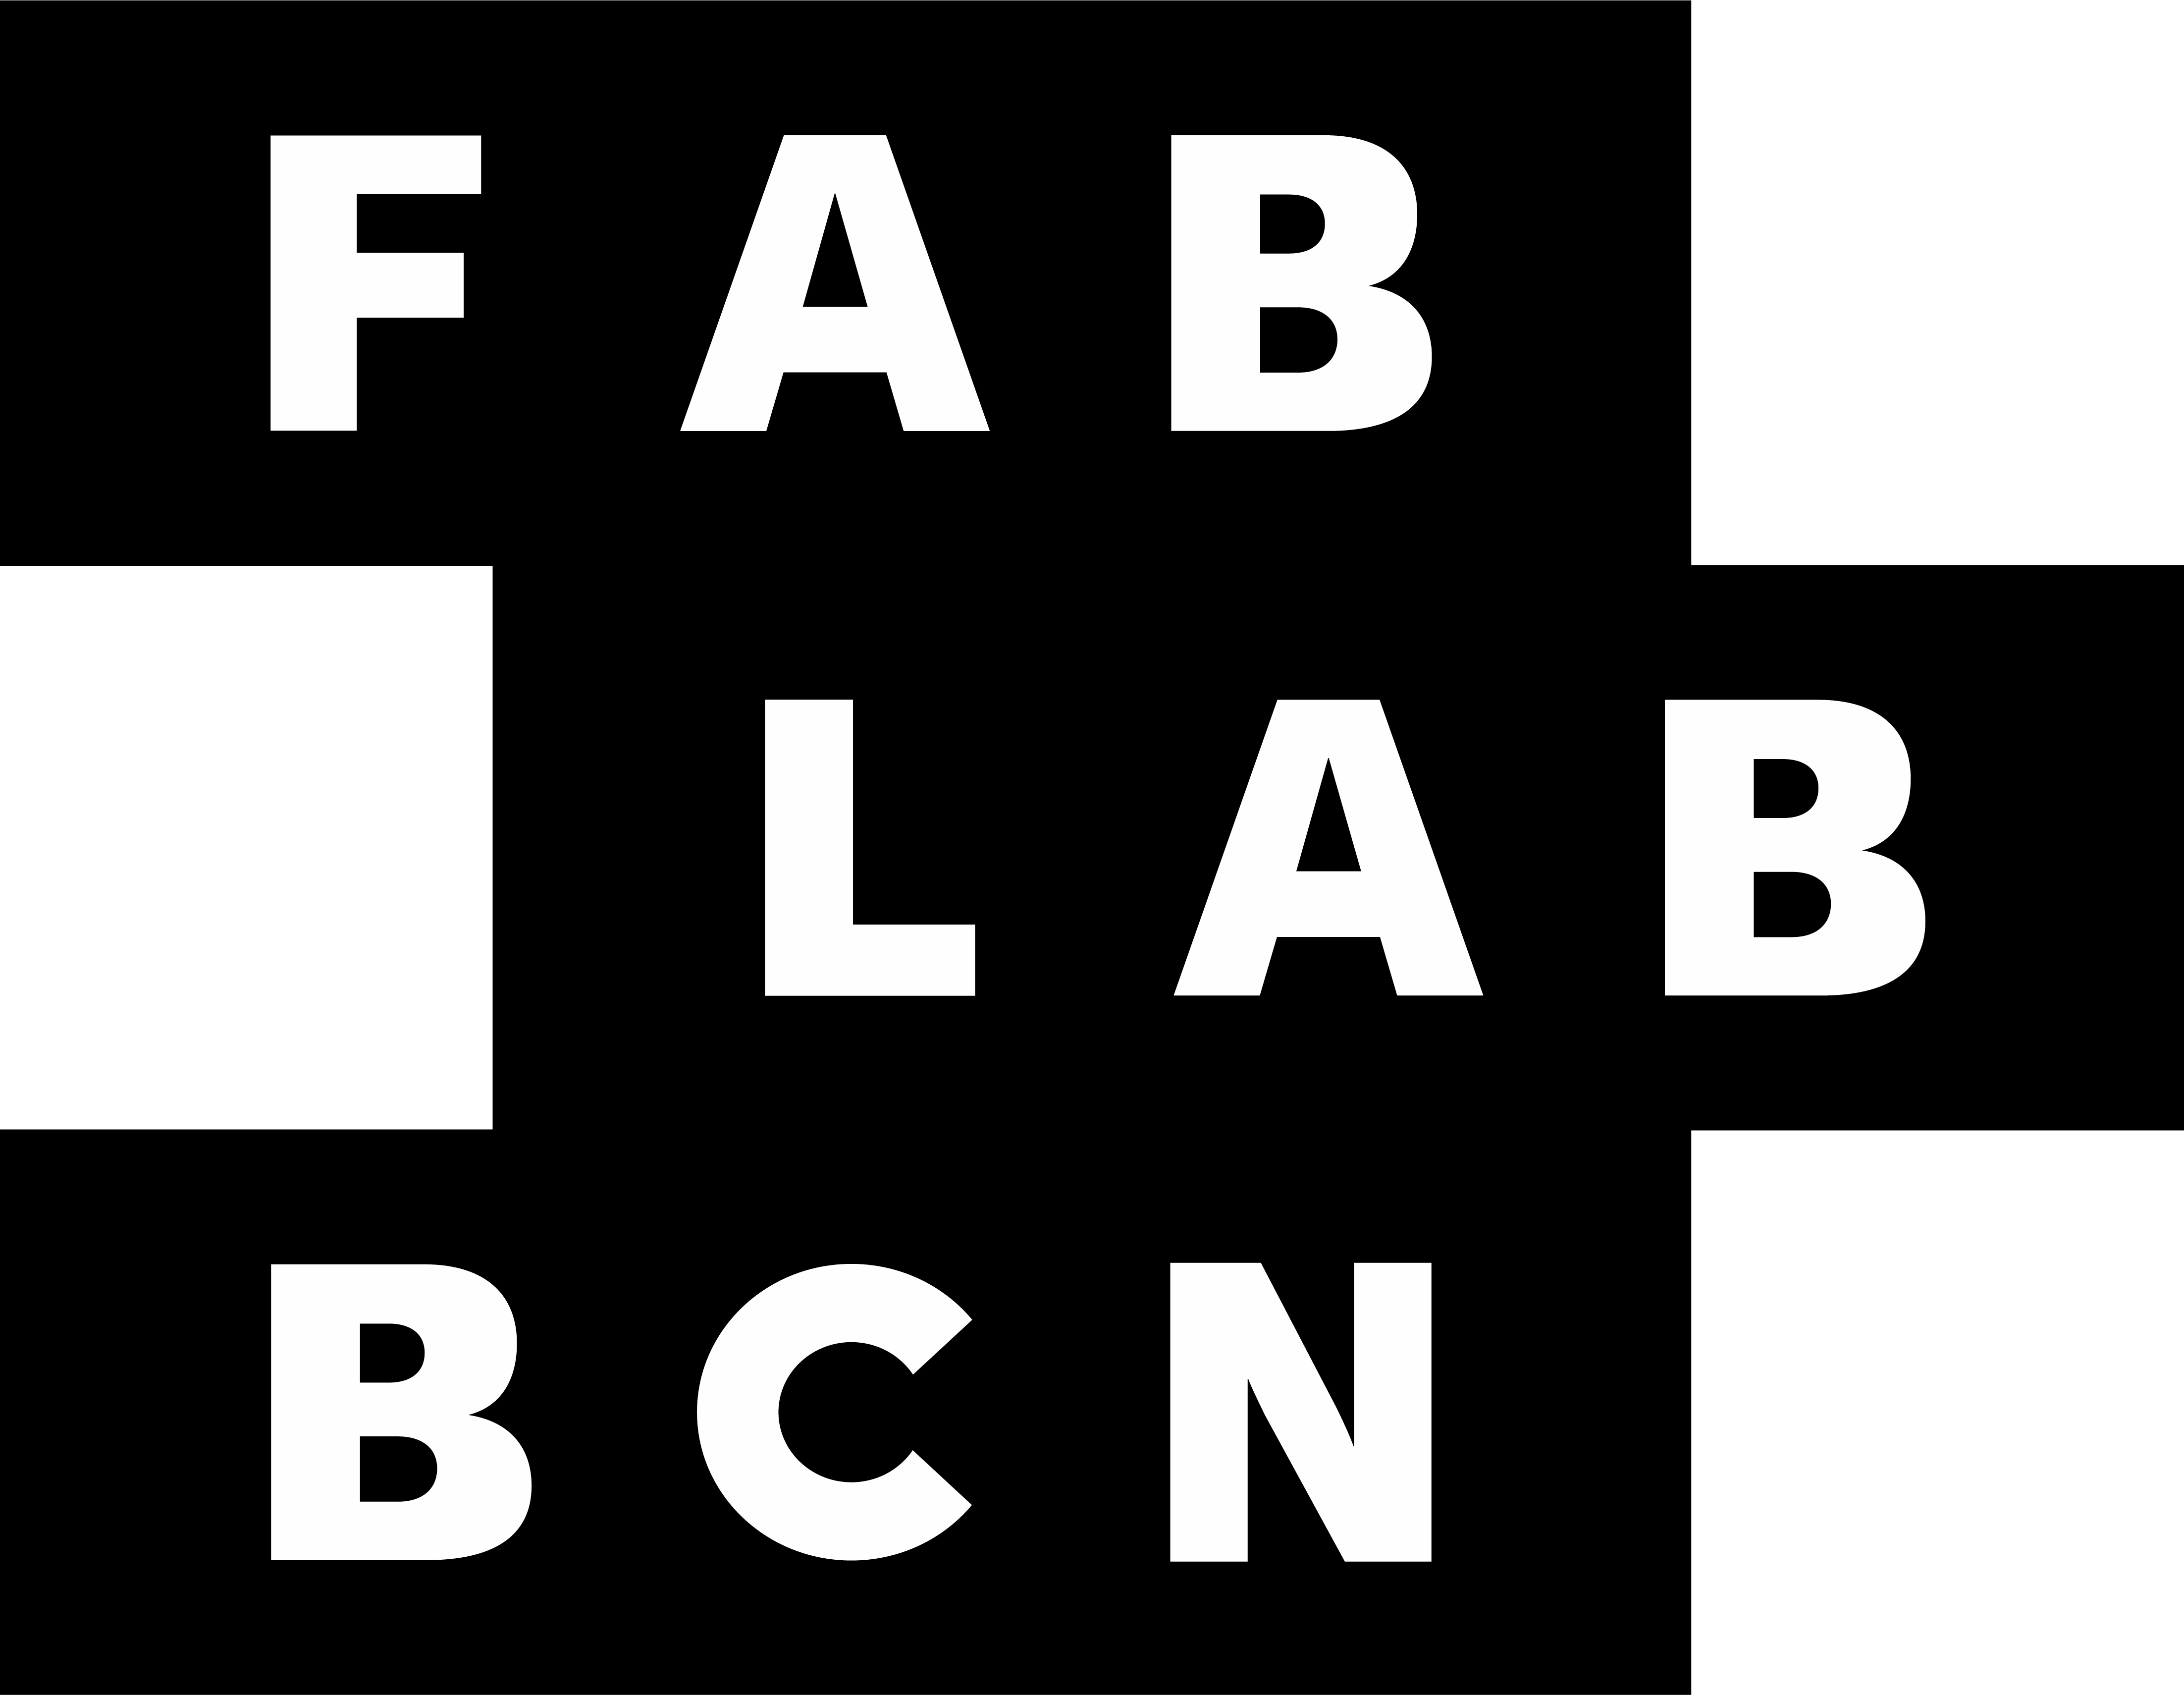 Fab Lab Barcelona: research and education centre